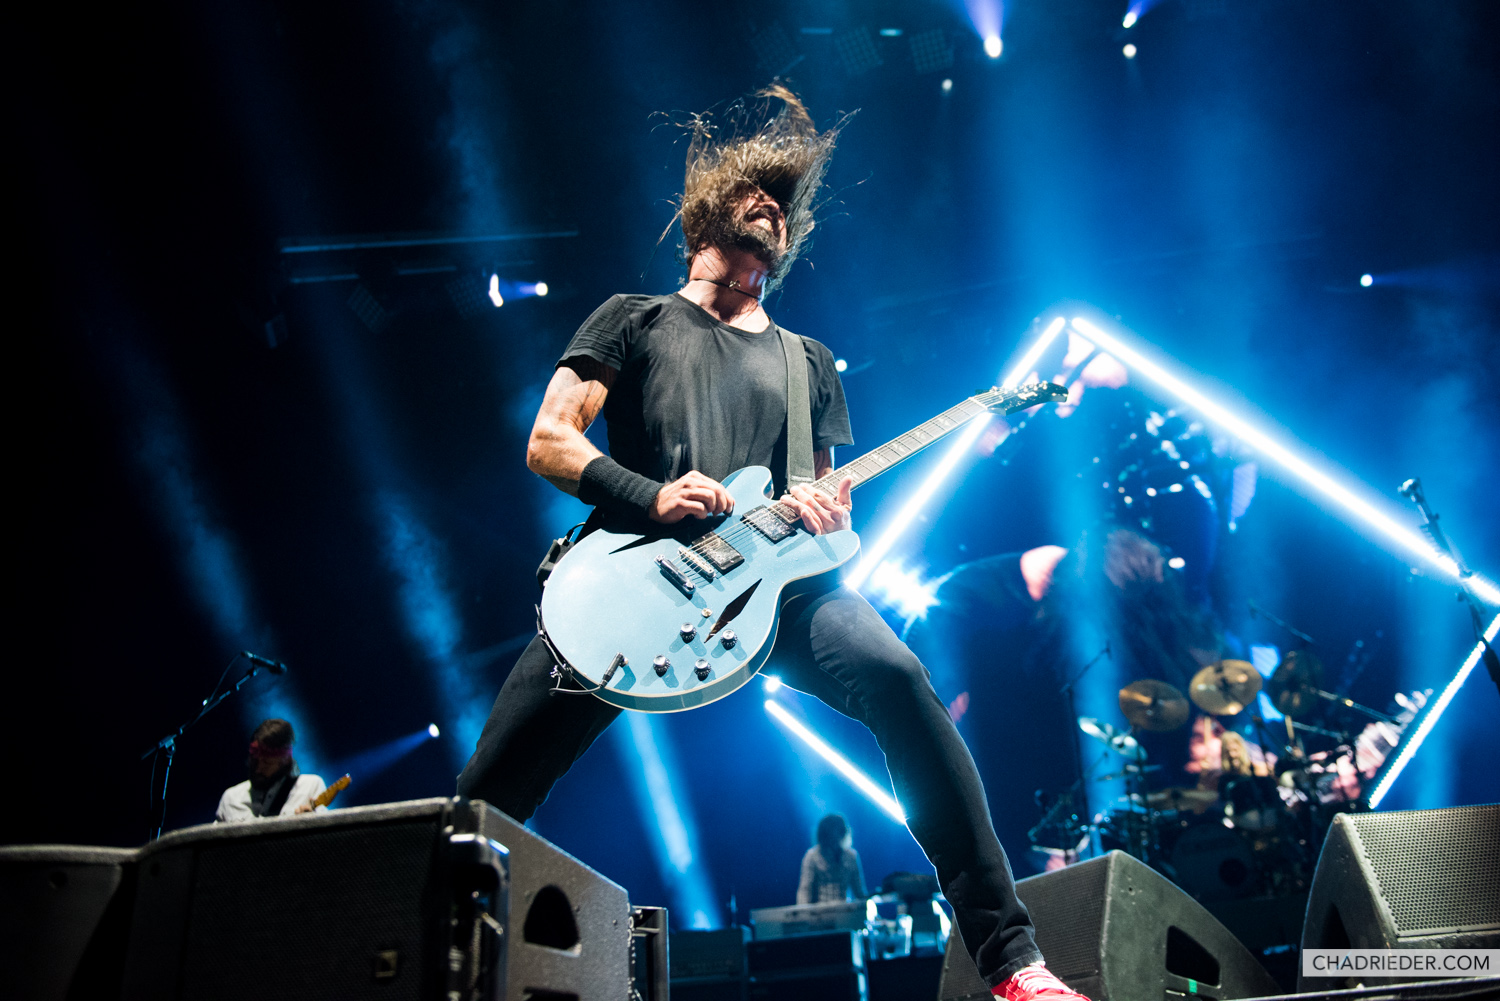 Dave Grohl rocks